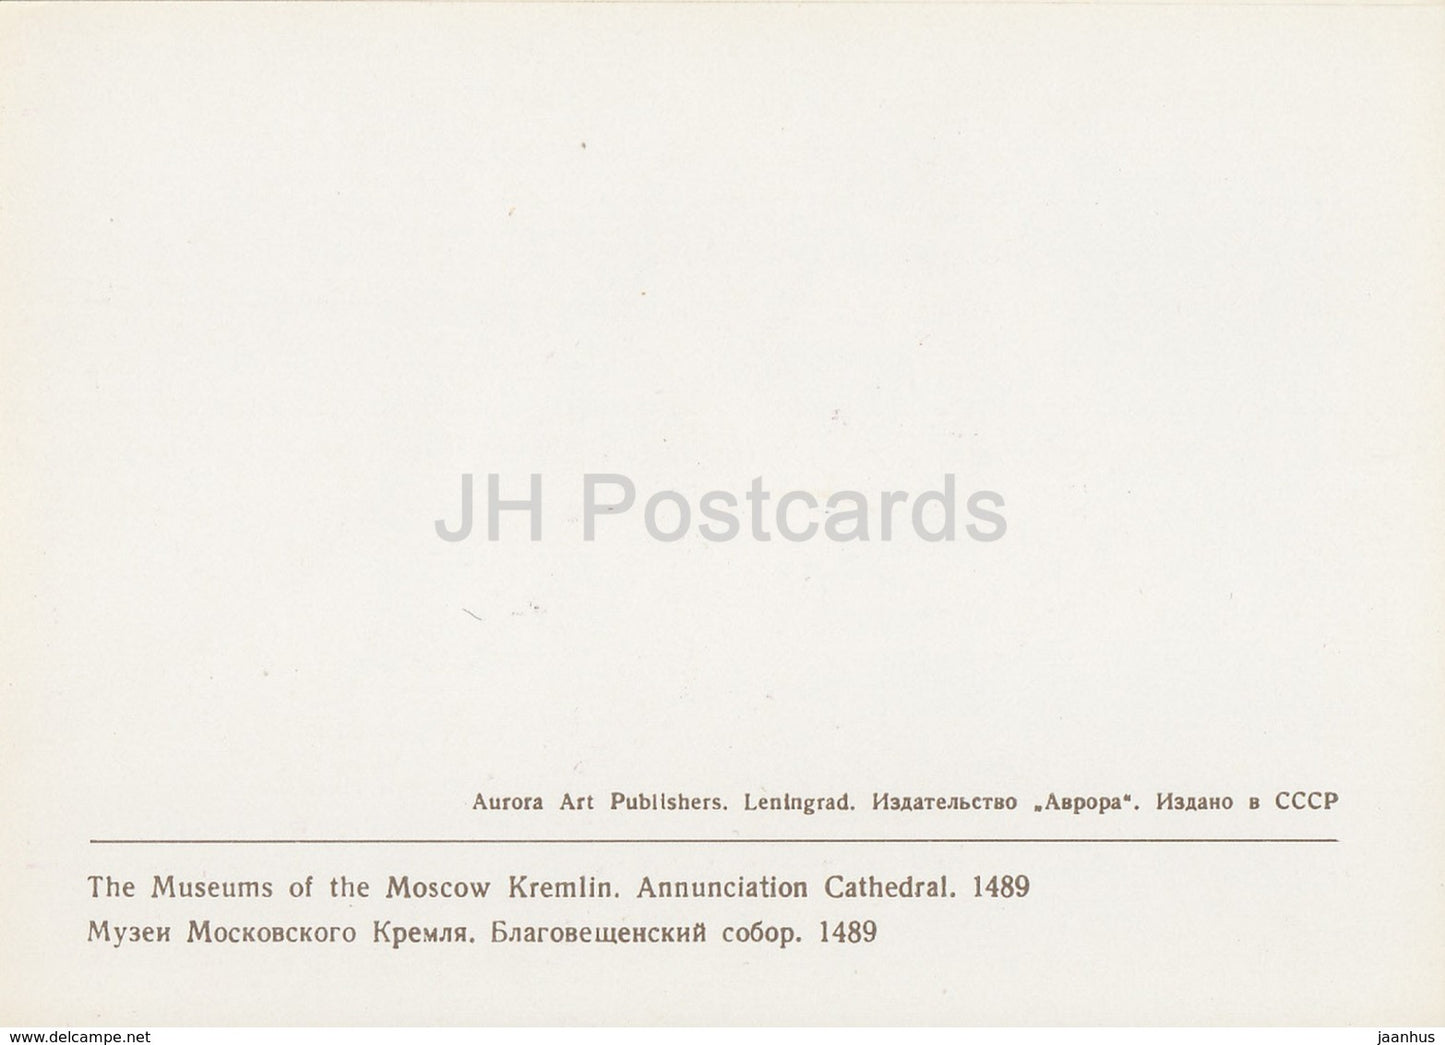 Annunciation Cathedral - Moscow Kremlin Museums - 1976 - Russia USSR - unused - JH Postcards